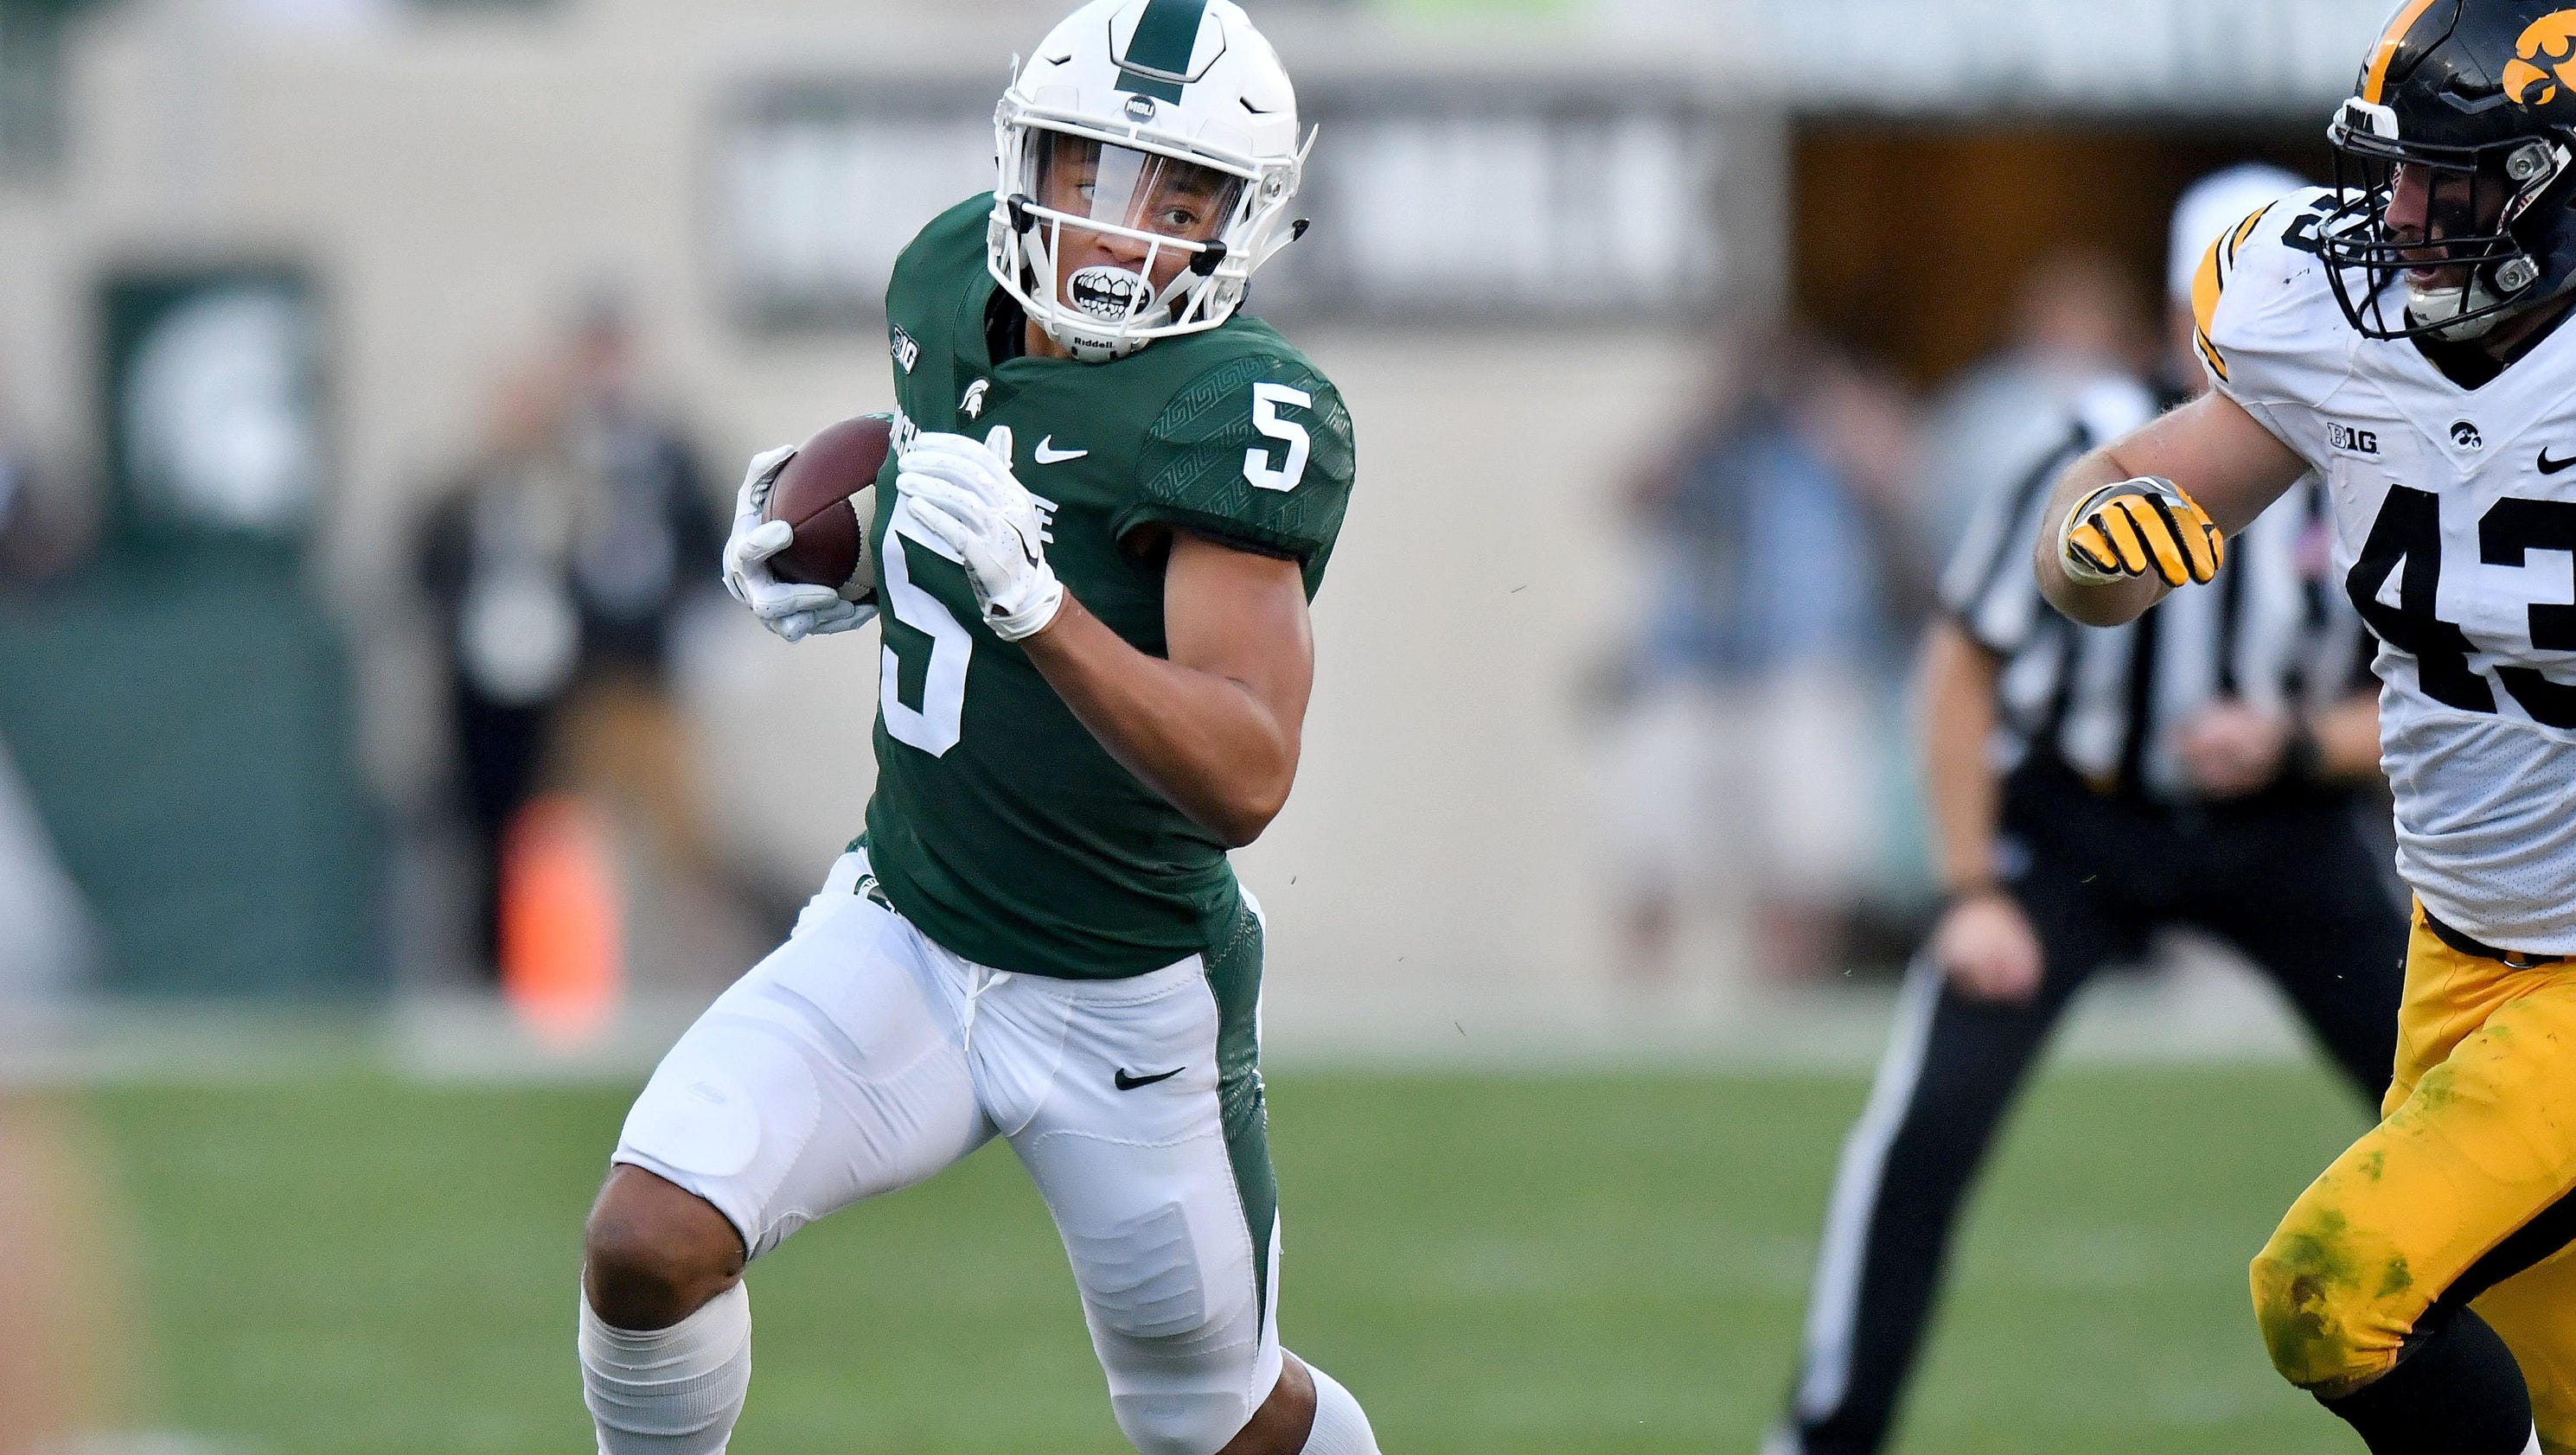 Andre Rison: Son Hunter to transfer from MSU